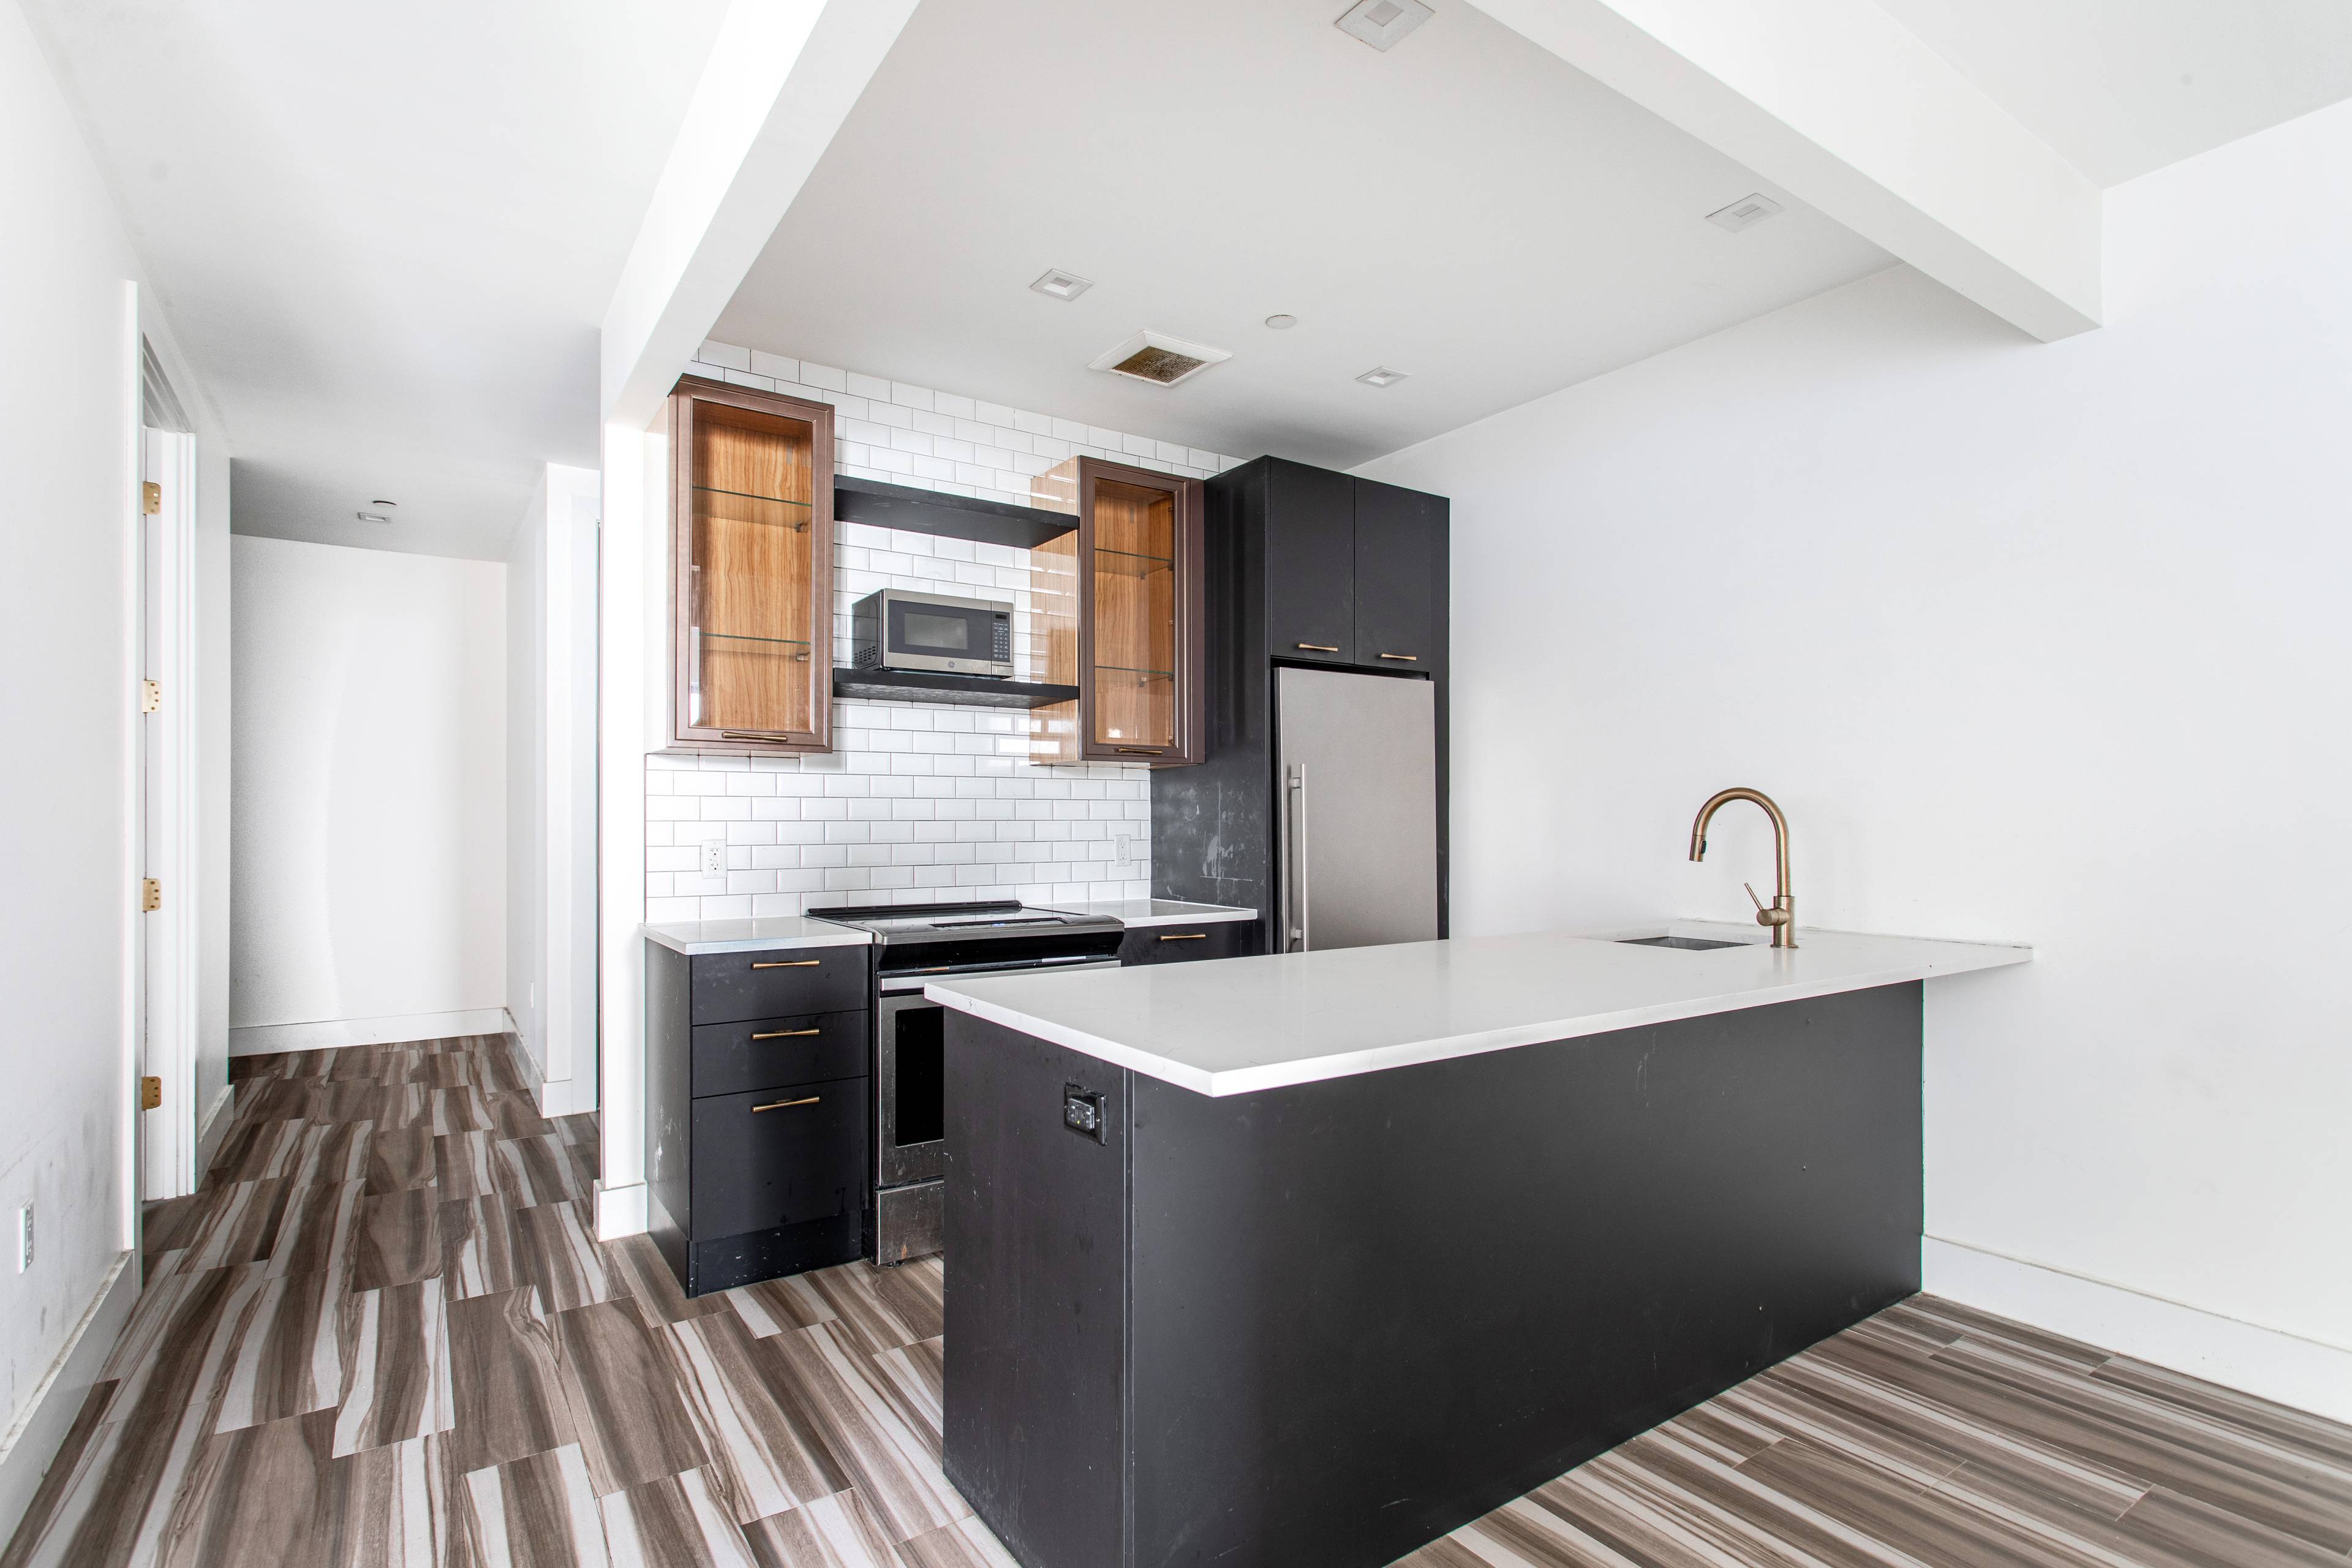 OFFERING 2 MONTHS FREE RENT Residence 1B at 709 Hart Street presents a well appointed contemporary four bedroom, one and one half bathroom DUPLEX layout offering condominium level finishes, spacious ...